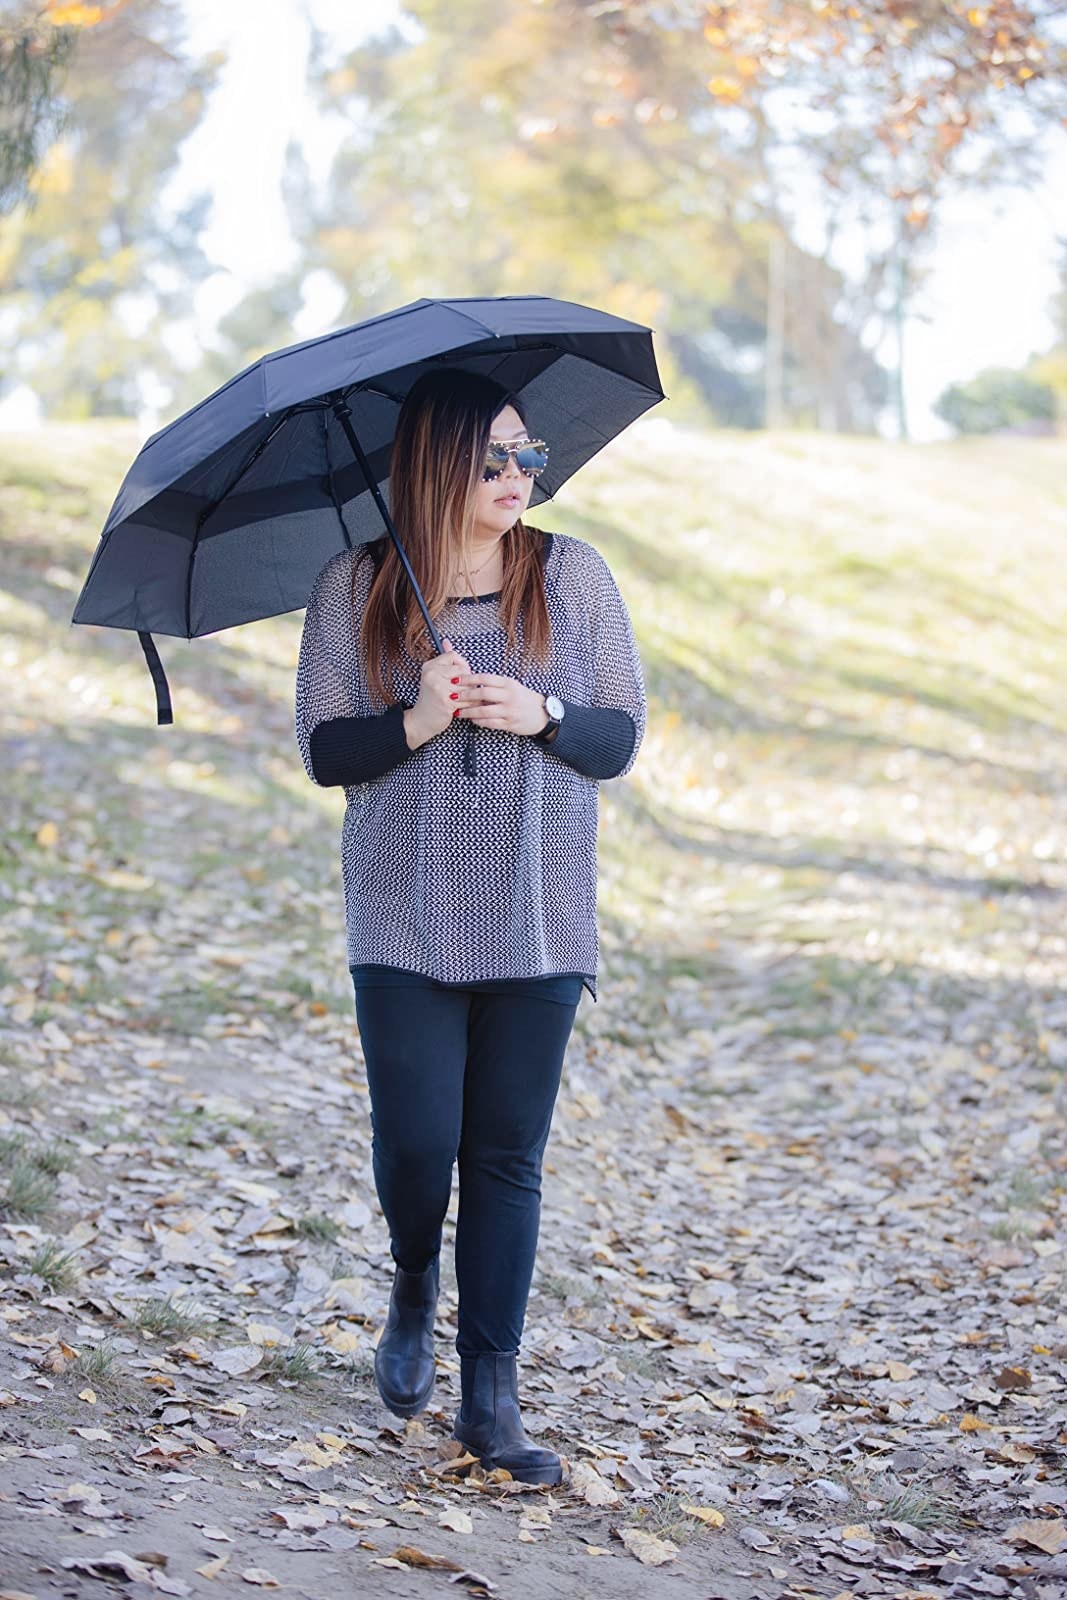 Reviewer standing in fallen leaves with black umbrella open above head